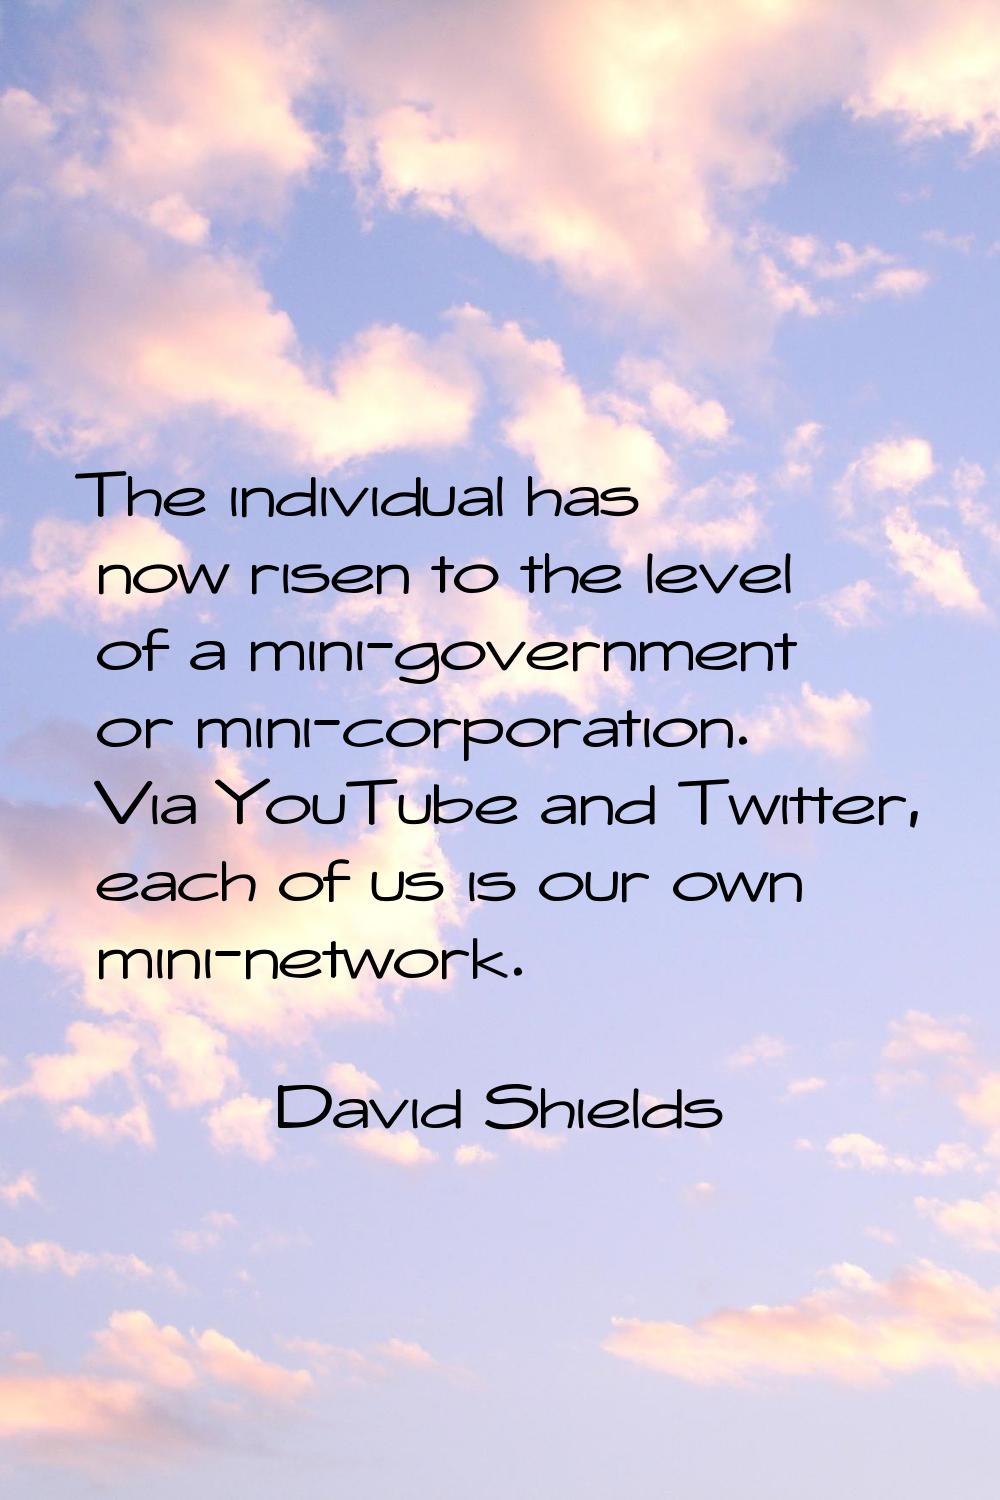 The individual has now risen to the level of a mini-government or mini-corporation. Via YouTube and